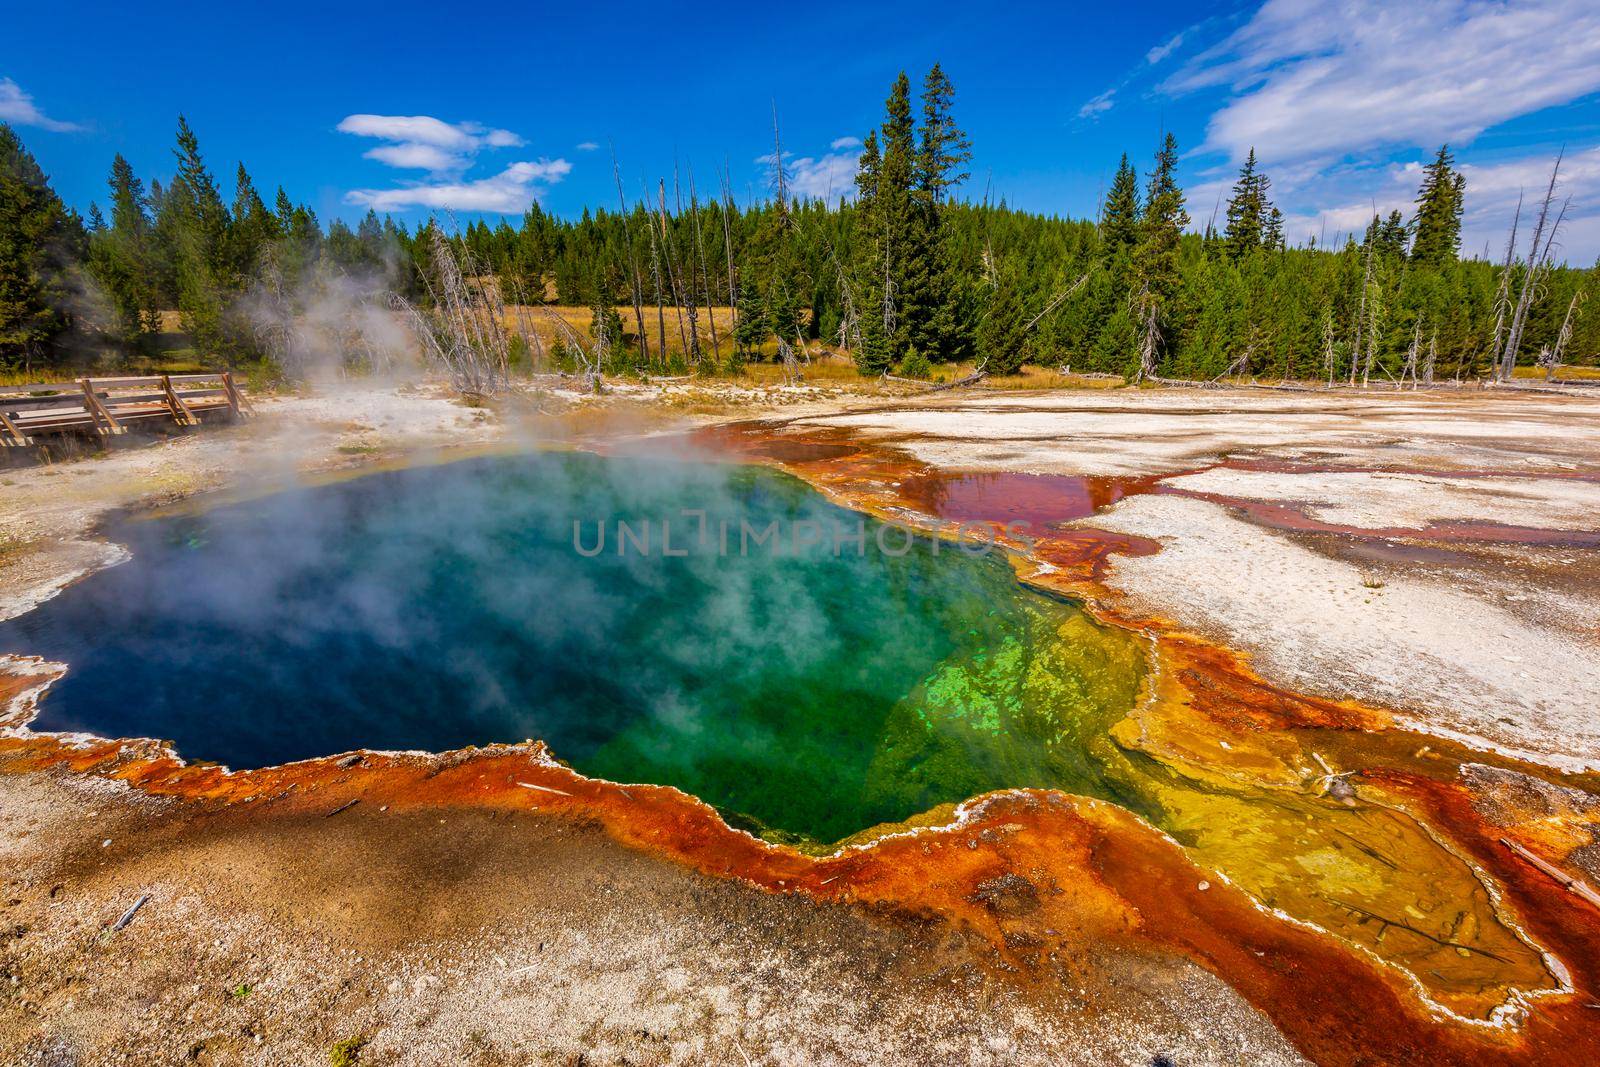 Abyss Pool is a hot spring in the West Thumb Geyser Basin of Yellowstone National Park